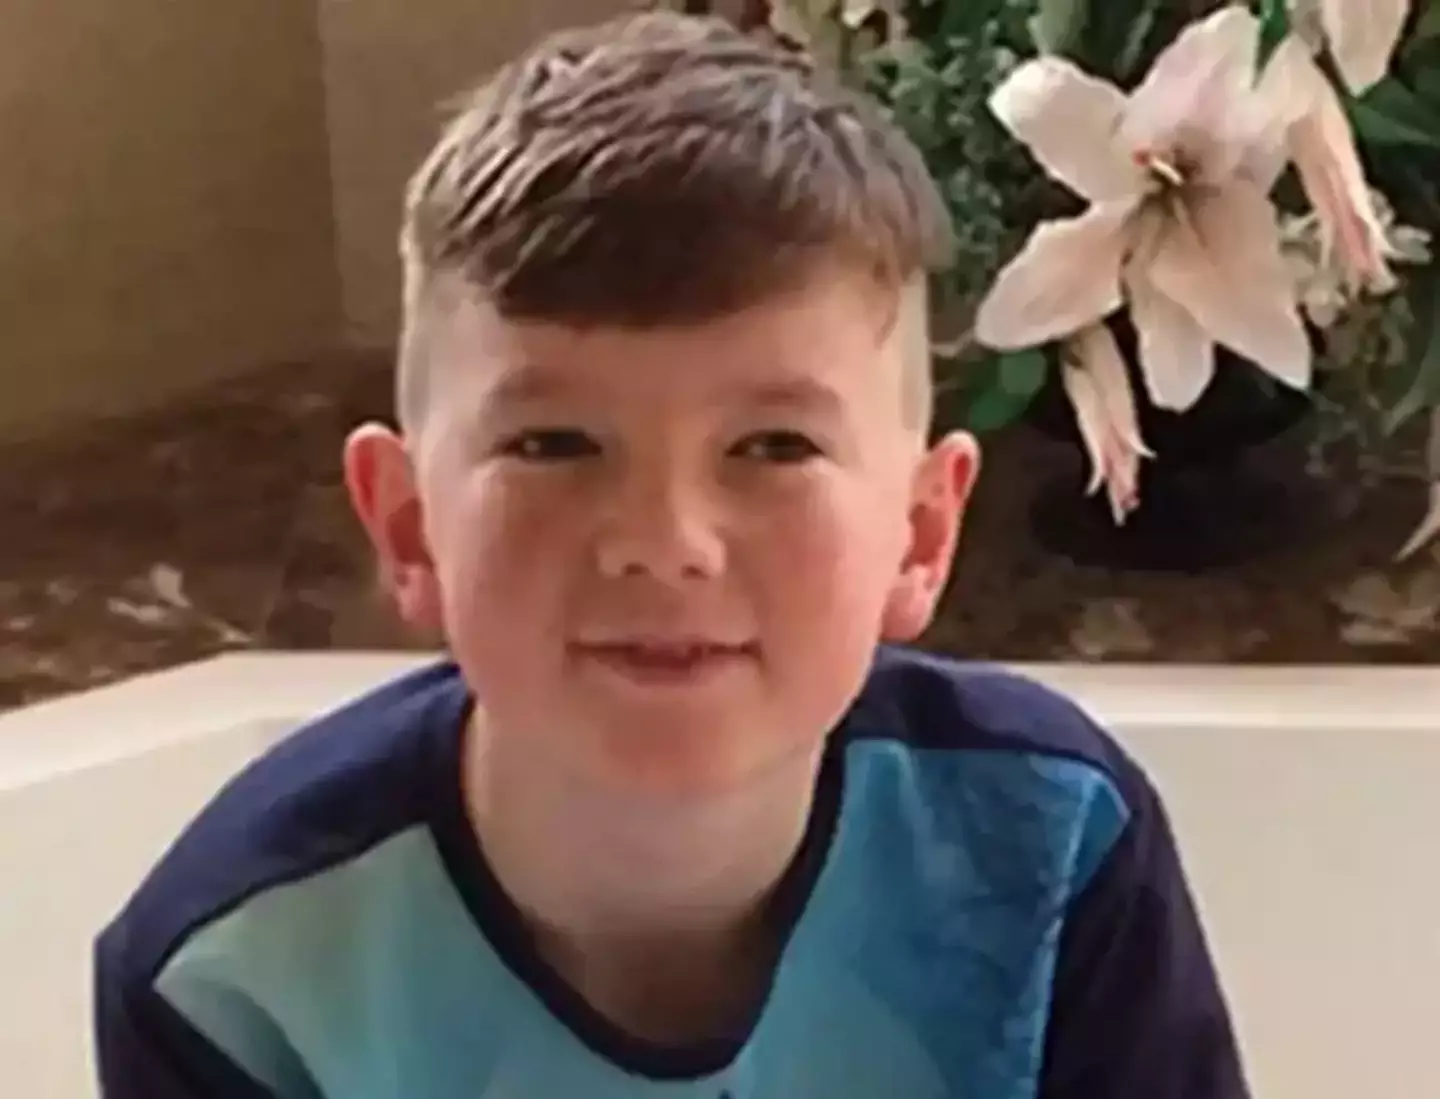 Alex Batty was just 11 when he went missing in Spain in October 2017.